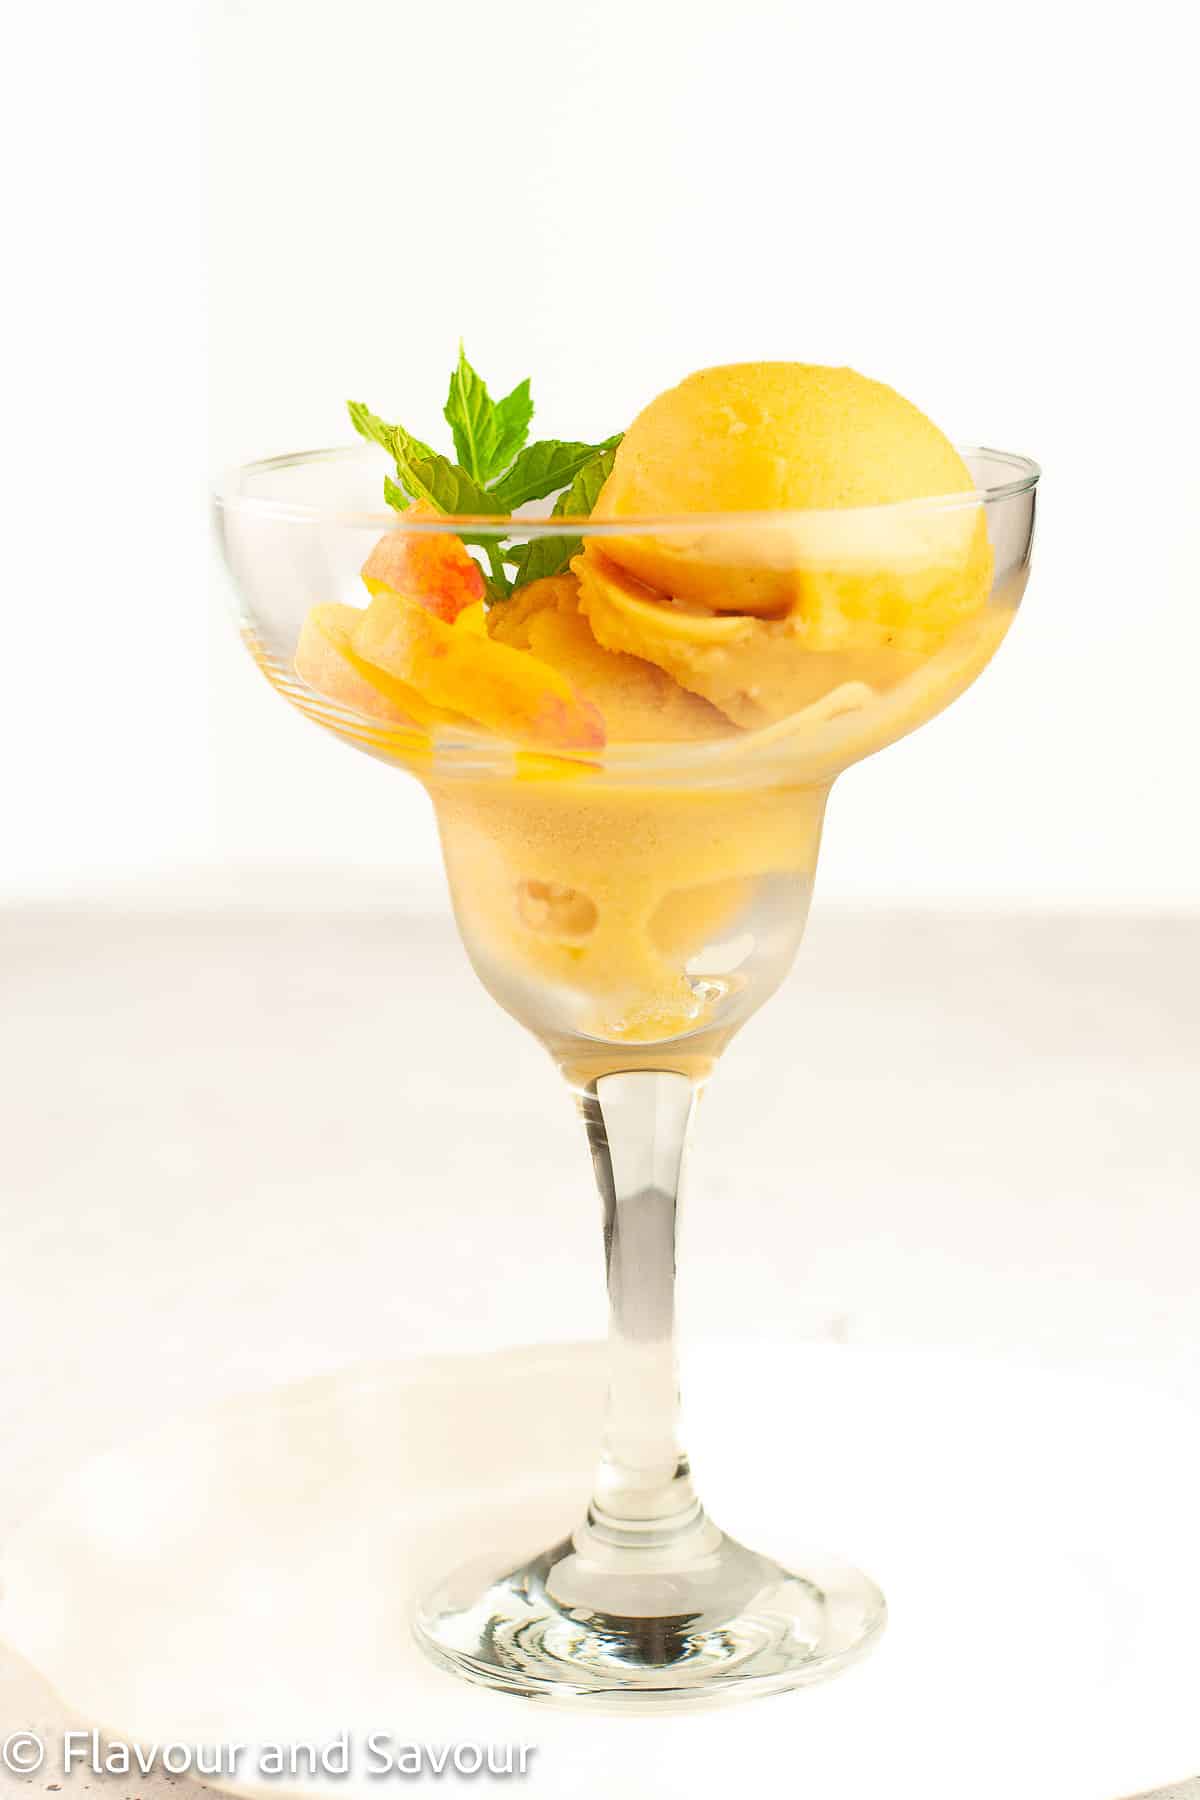 Peach ginger sorbet in a stemmed dessert glass with a sprig of mint.